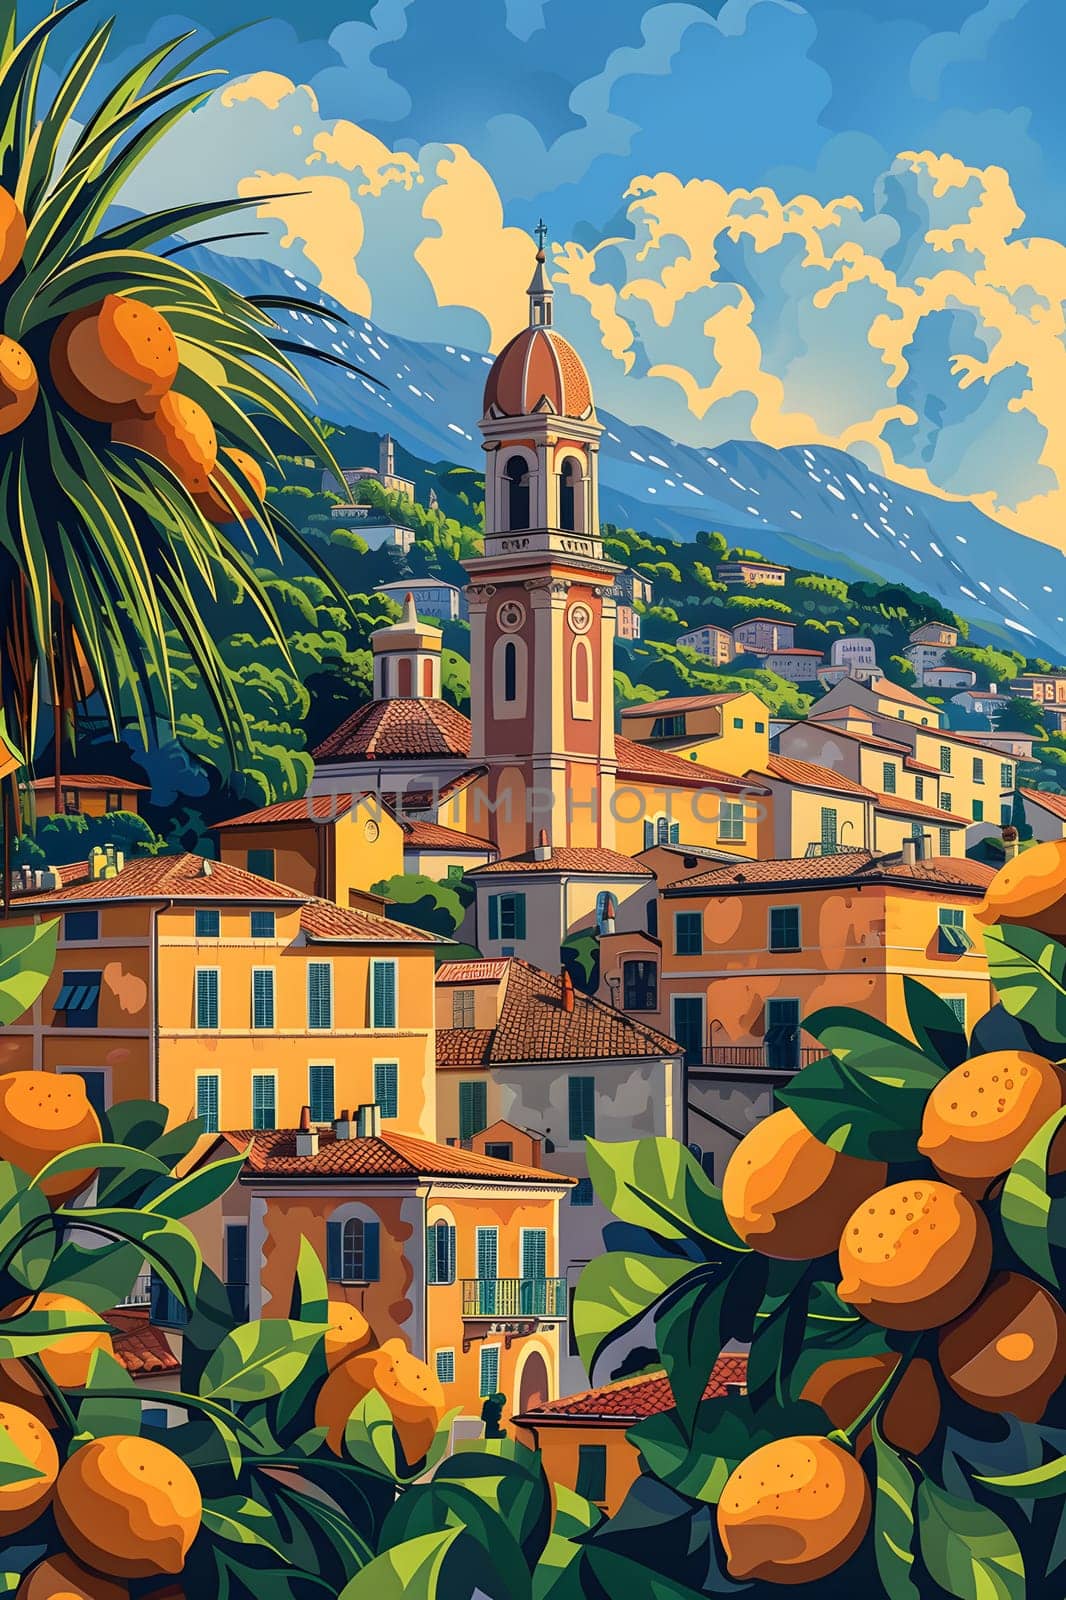 Art depicting a cityscape with green palm trees and oranges under a cloudy sky by Nadtochiy